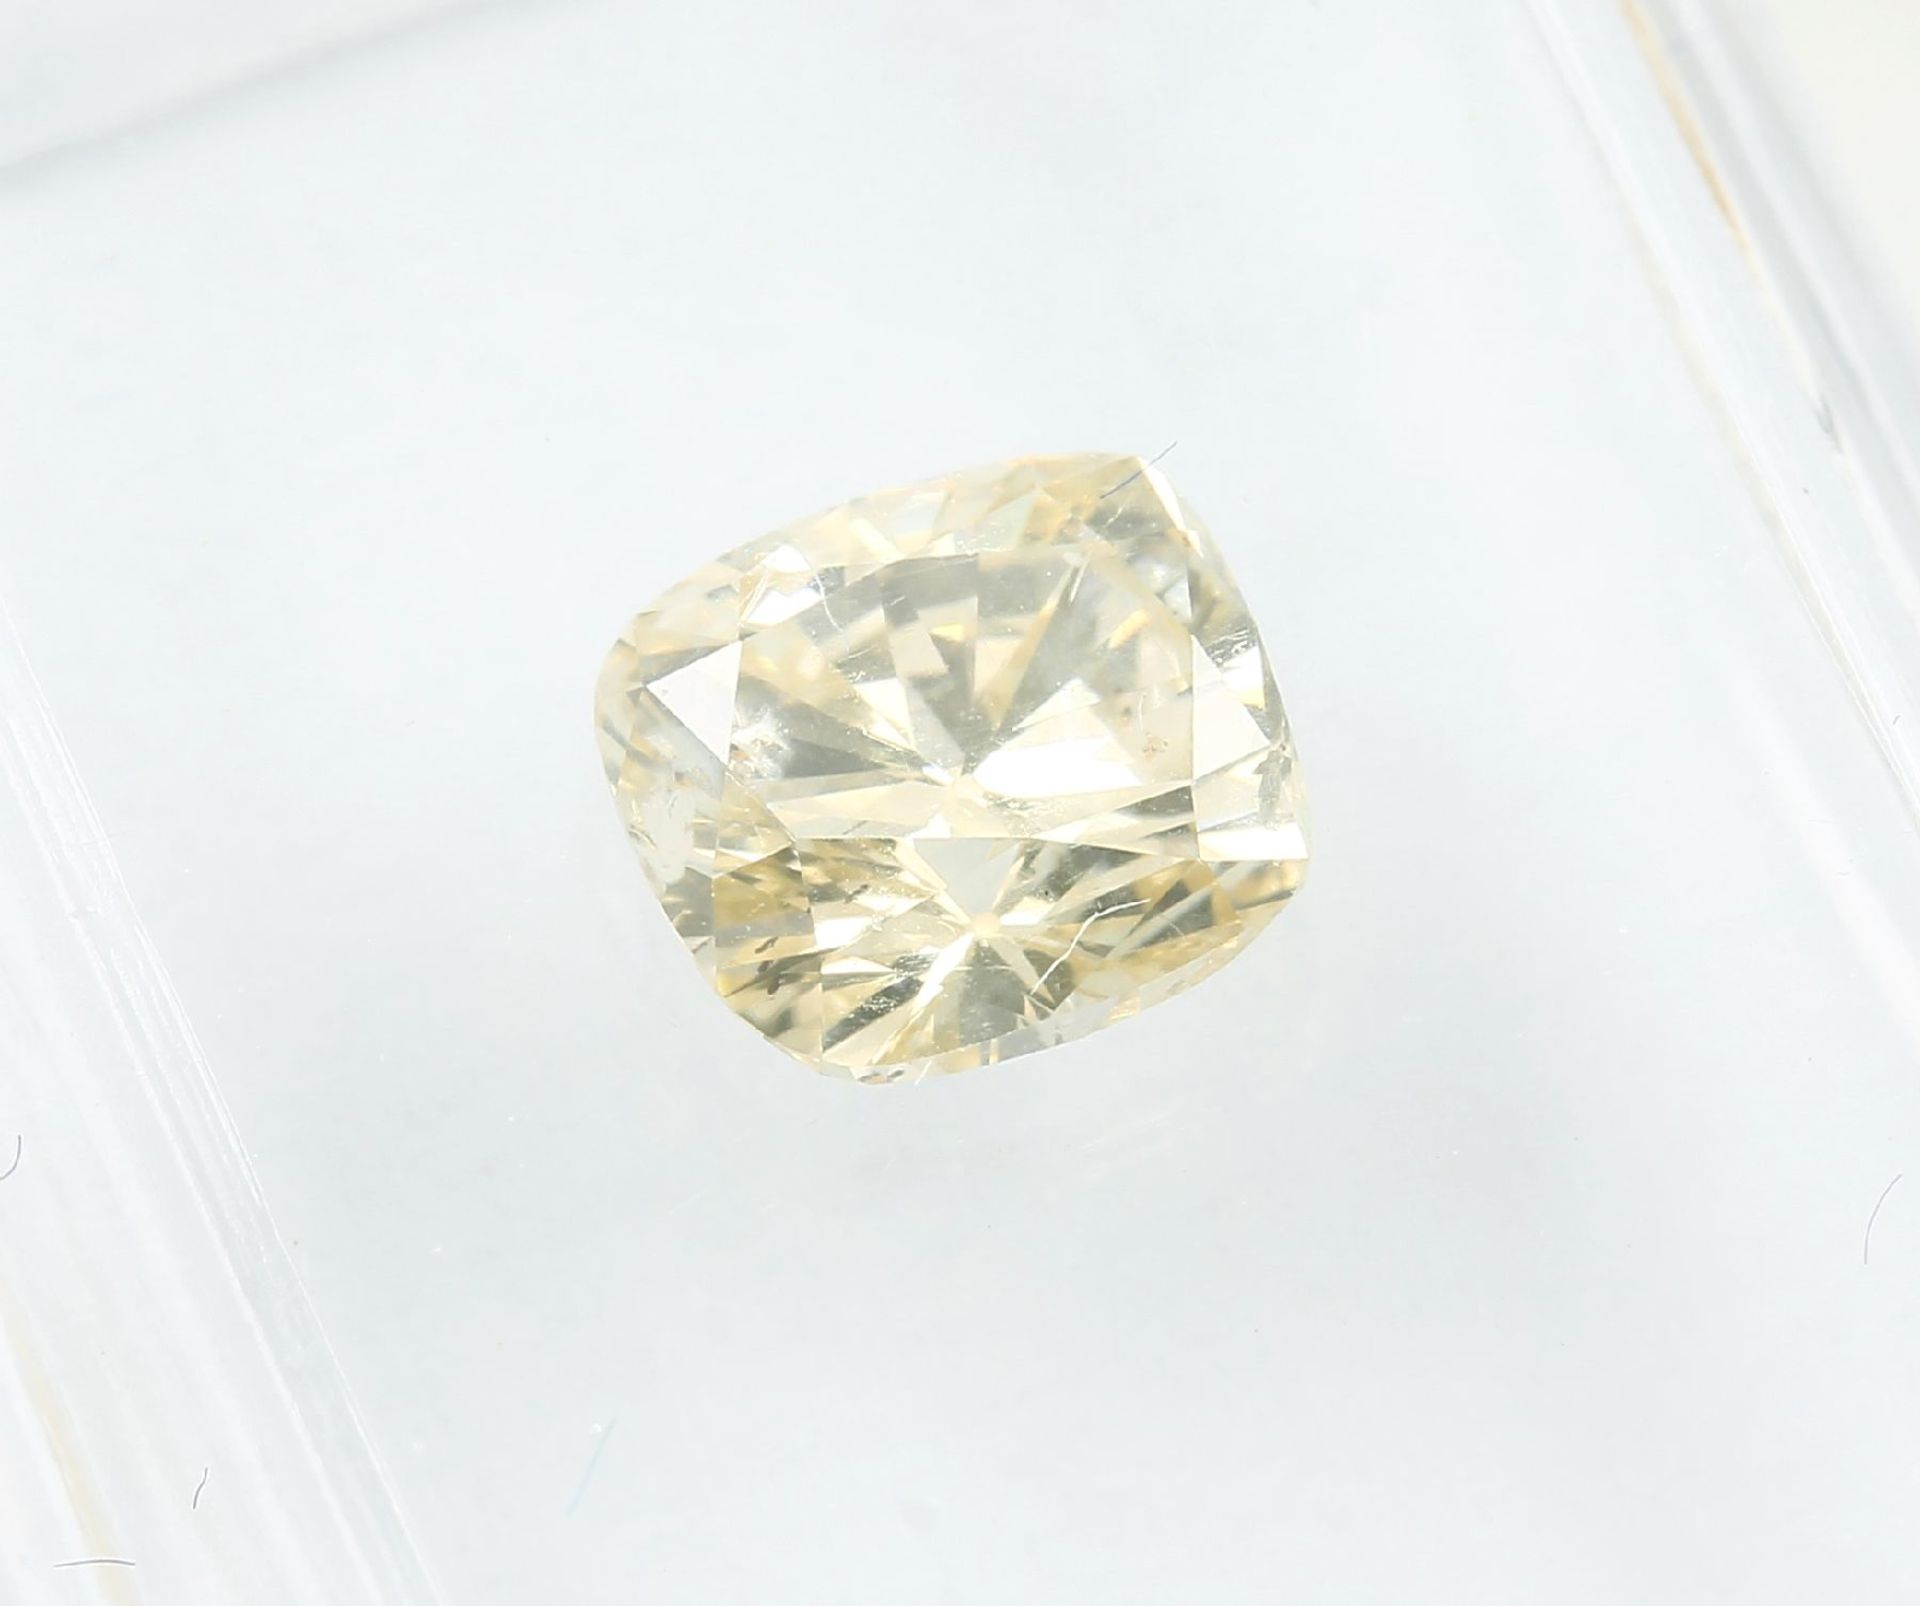 Loser Diamant, 0.91 ct natural Fancy Brownish Yellow/p1, - Image 3 of 3